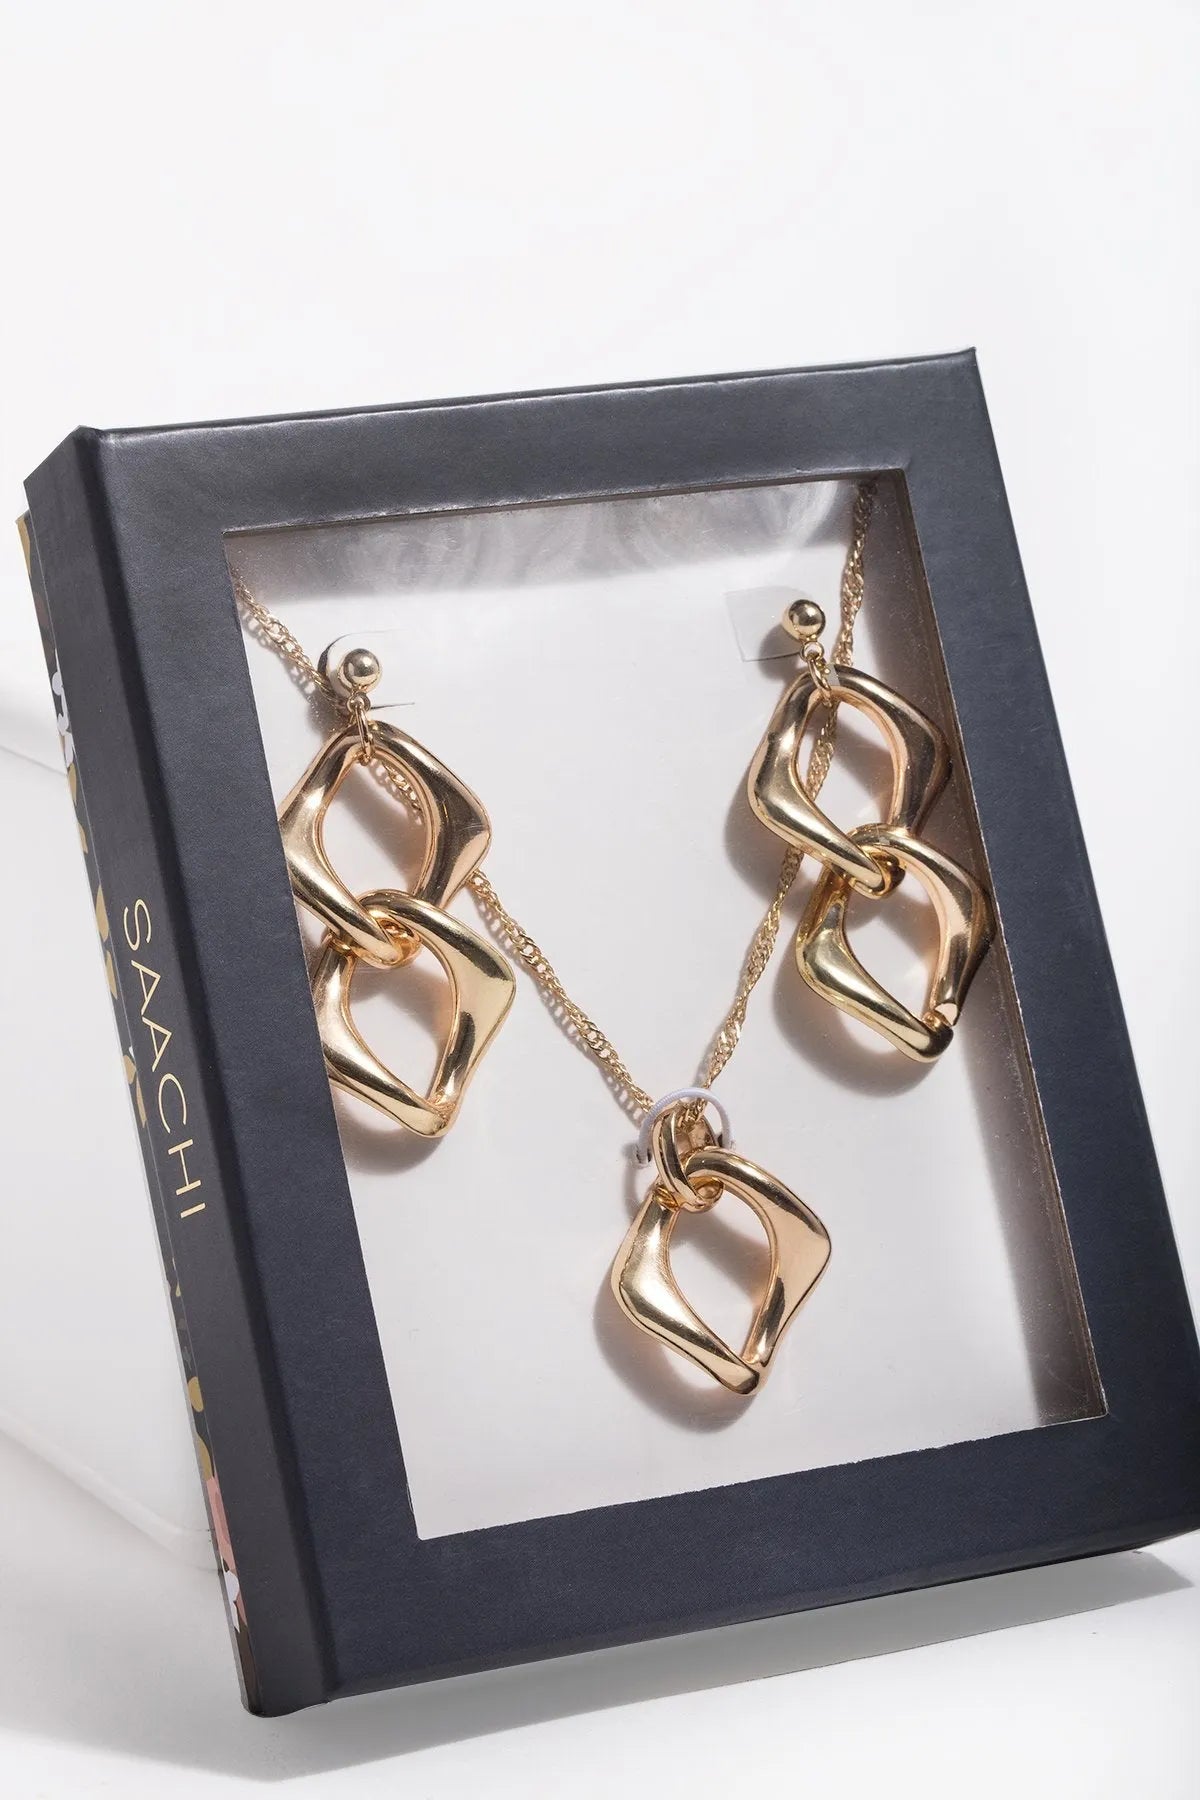 Saachistyle Infinity Necklace and Earring Gift Box